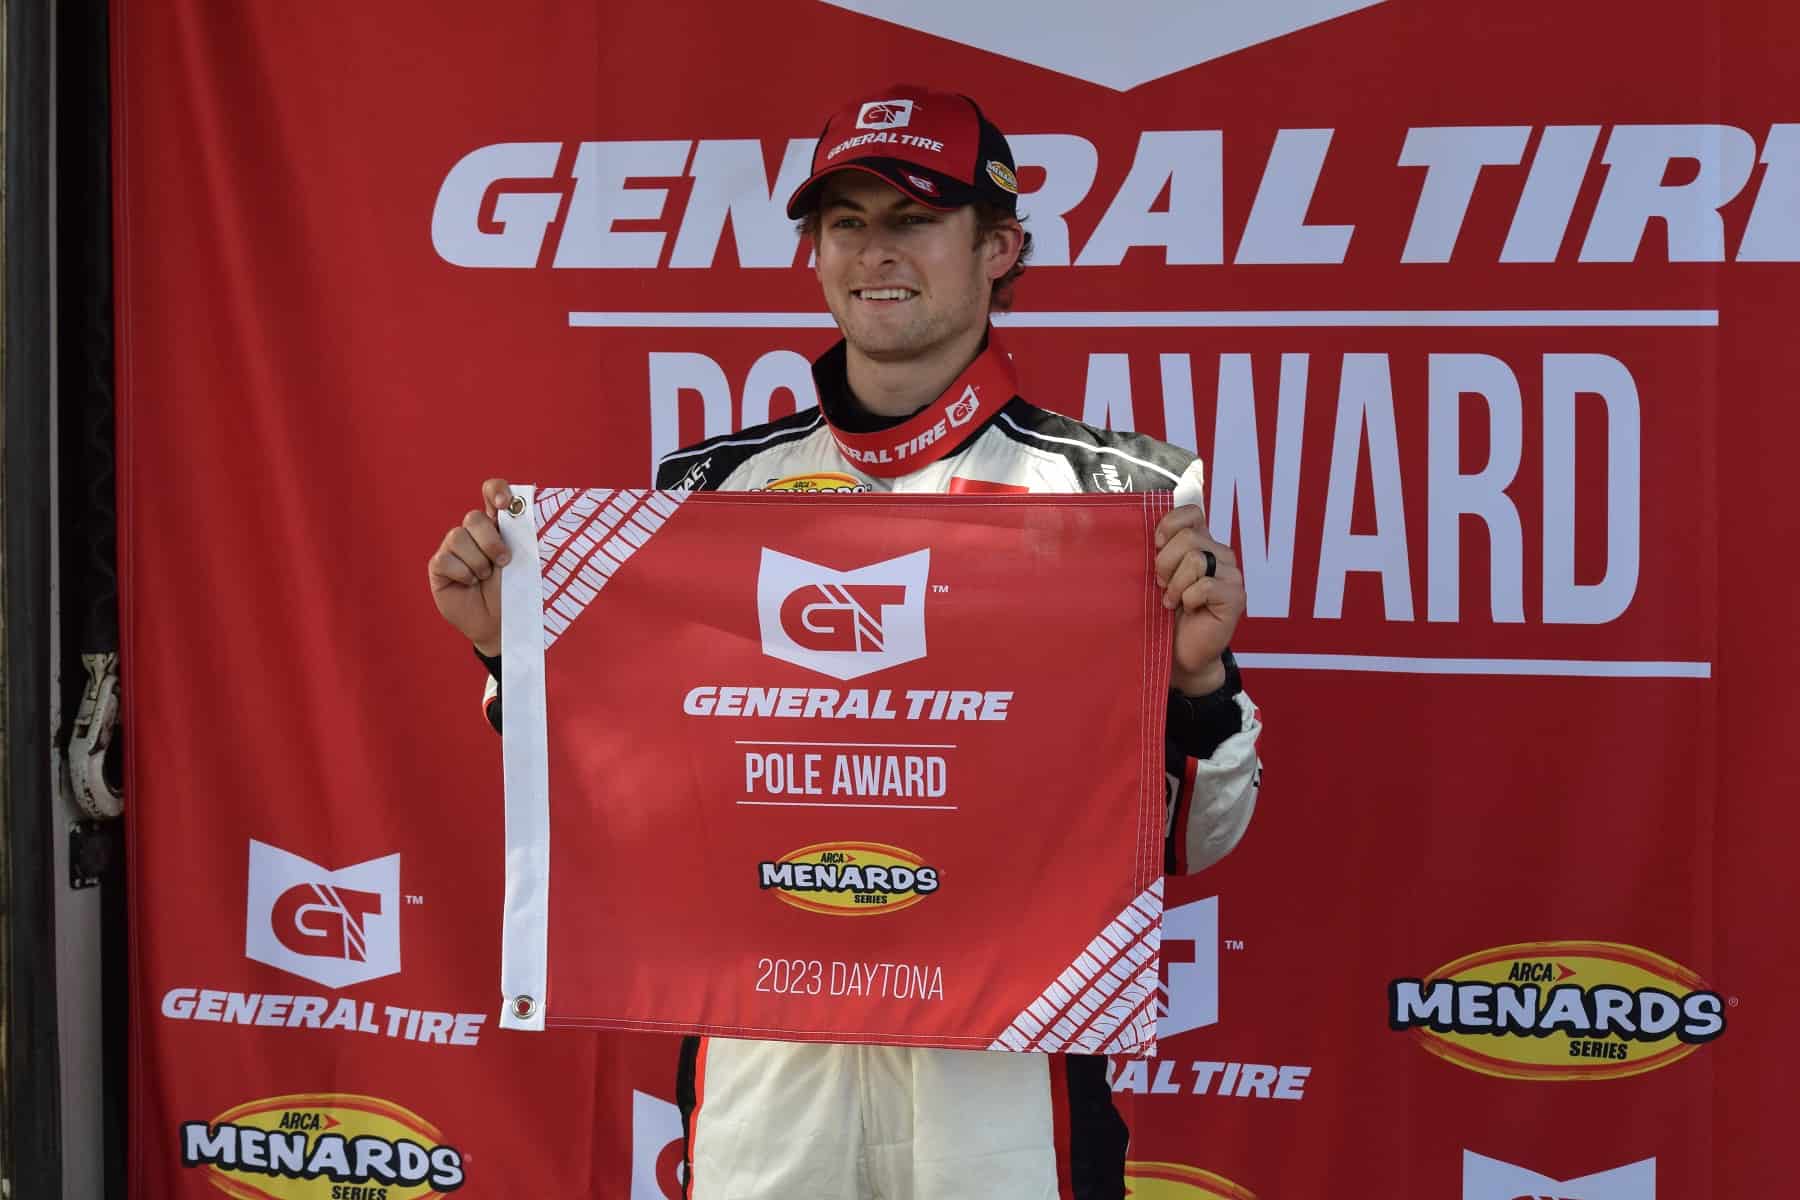 Connor Mosack poses with the General Tire Pole Award Friday at Daytona Int'l Speedway.